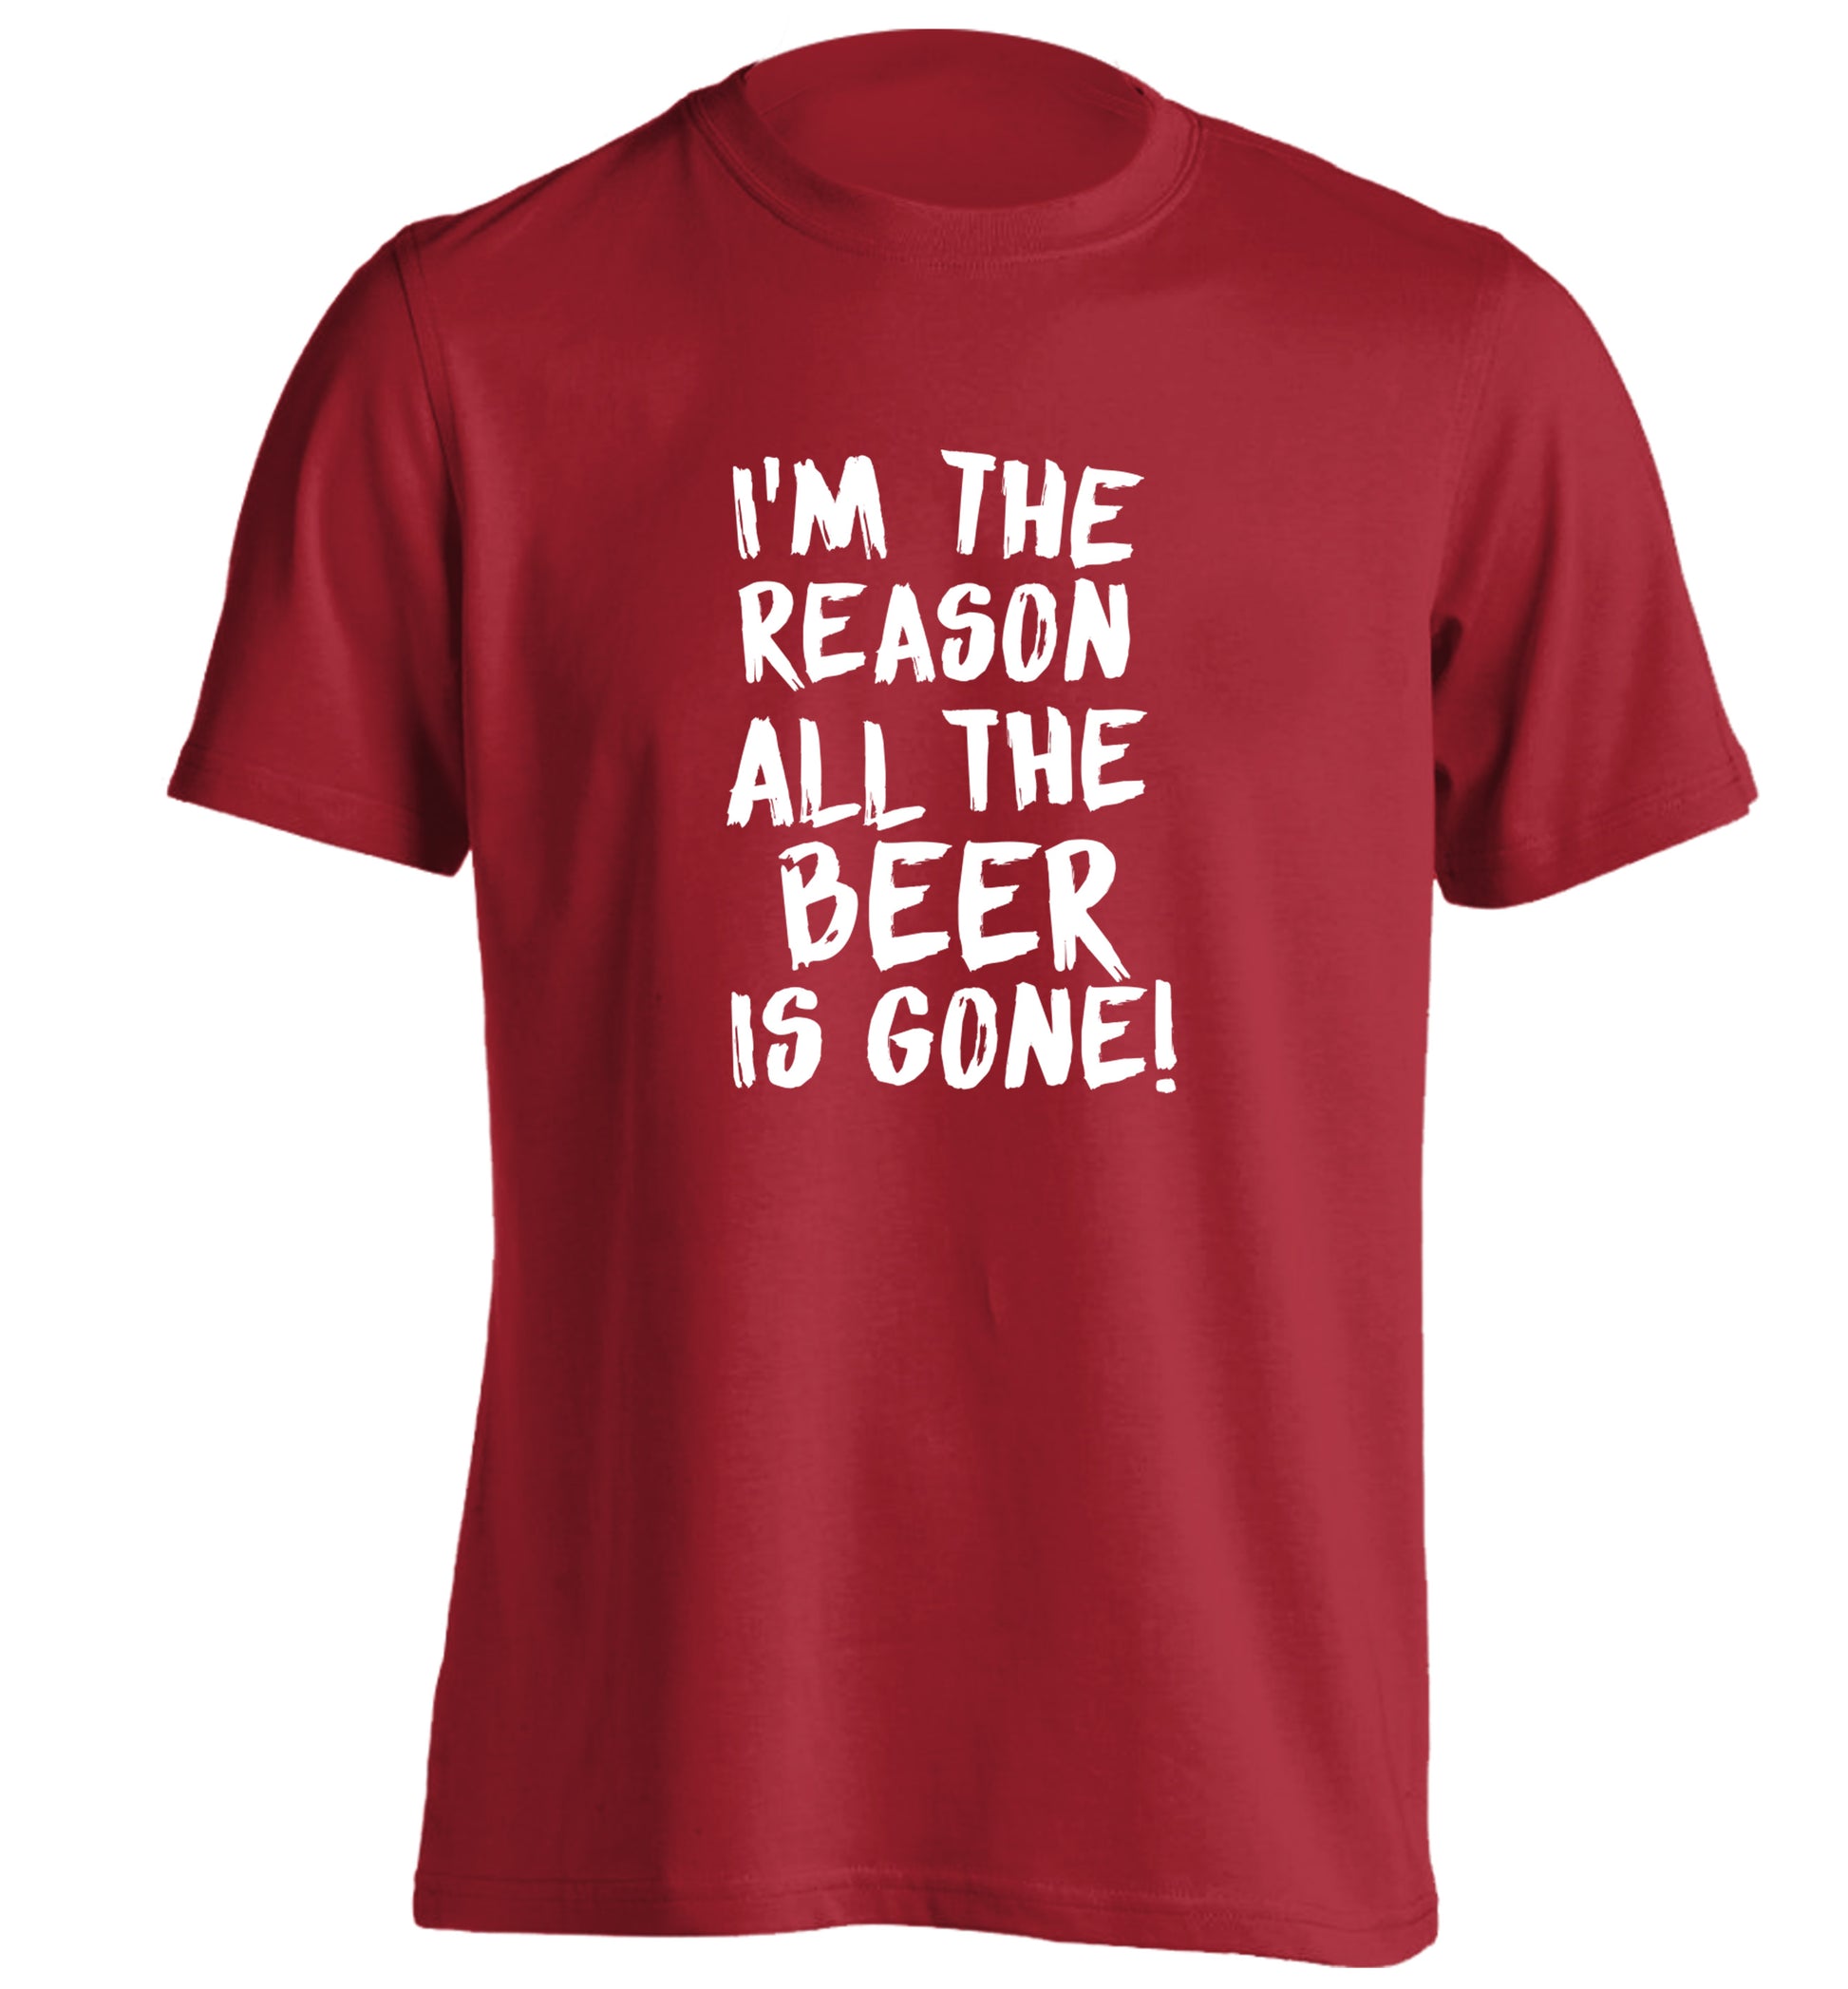 I'm the reason all the beer is gone adults unisex red Tshirt 2XL